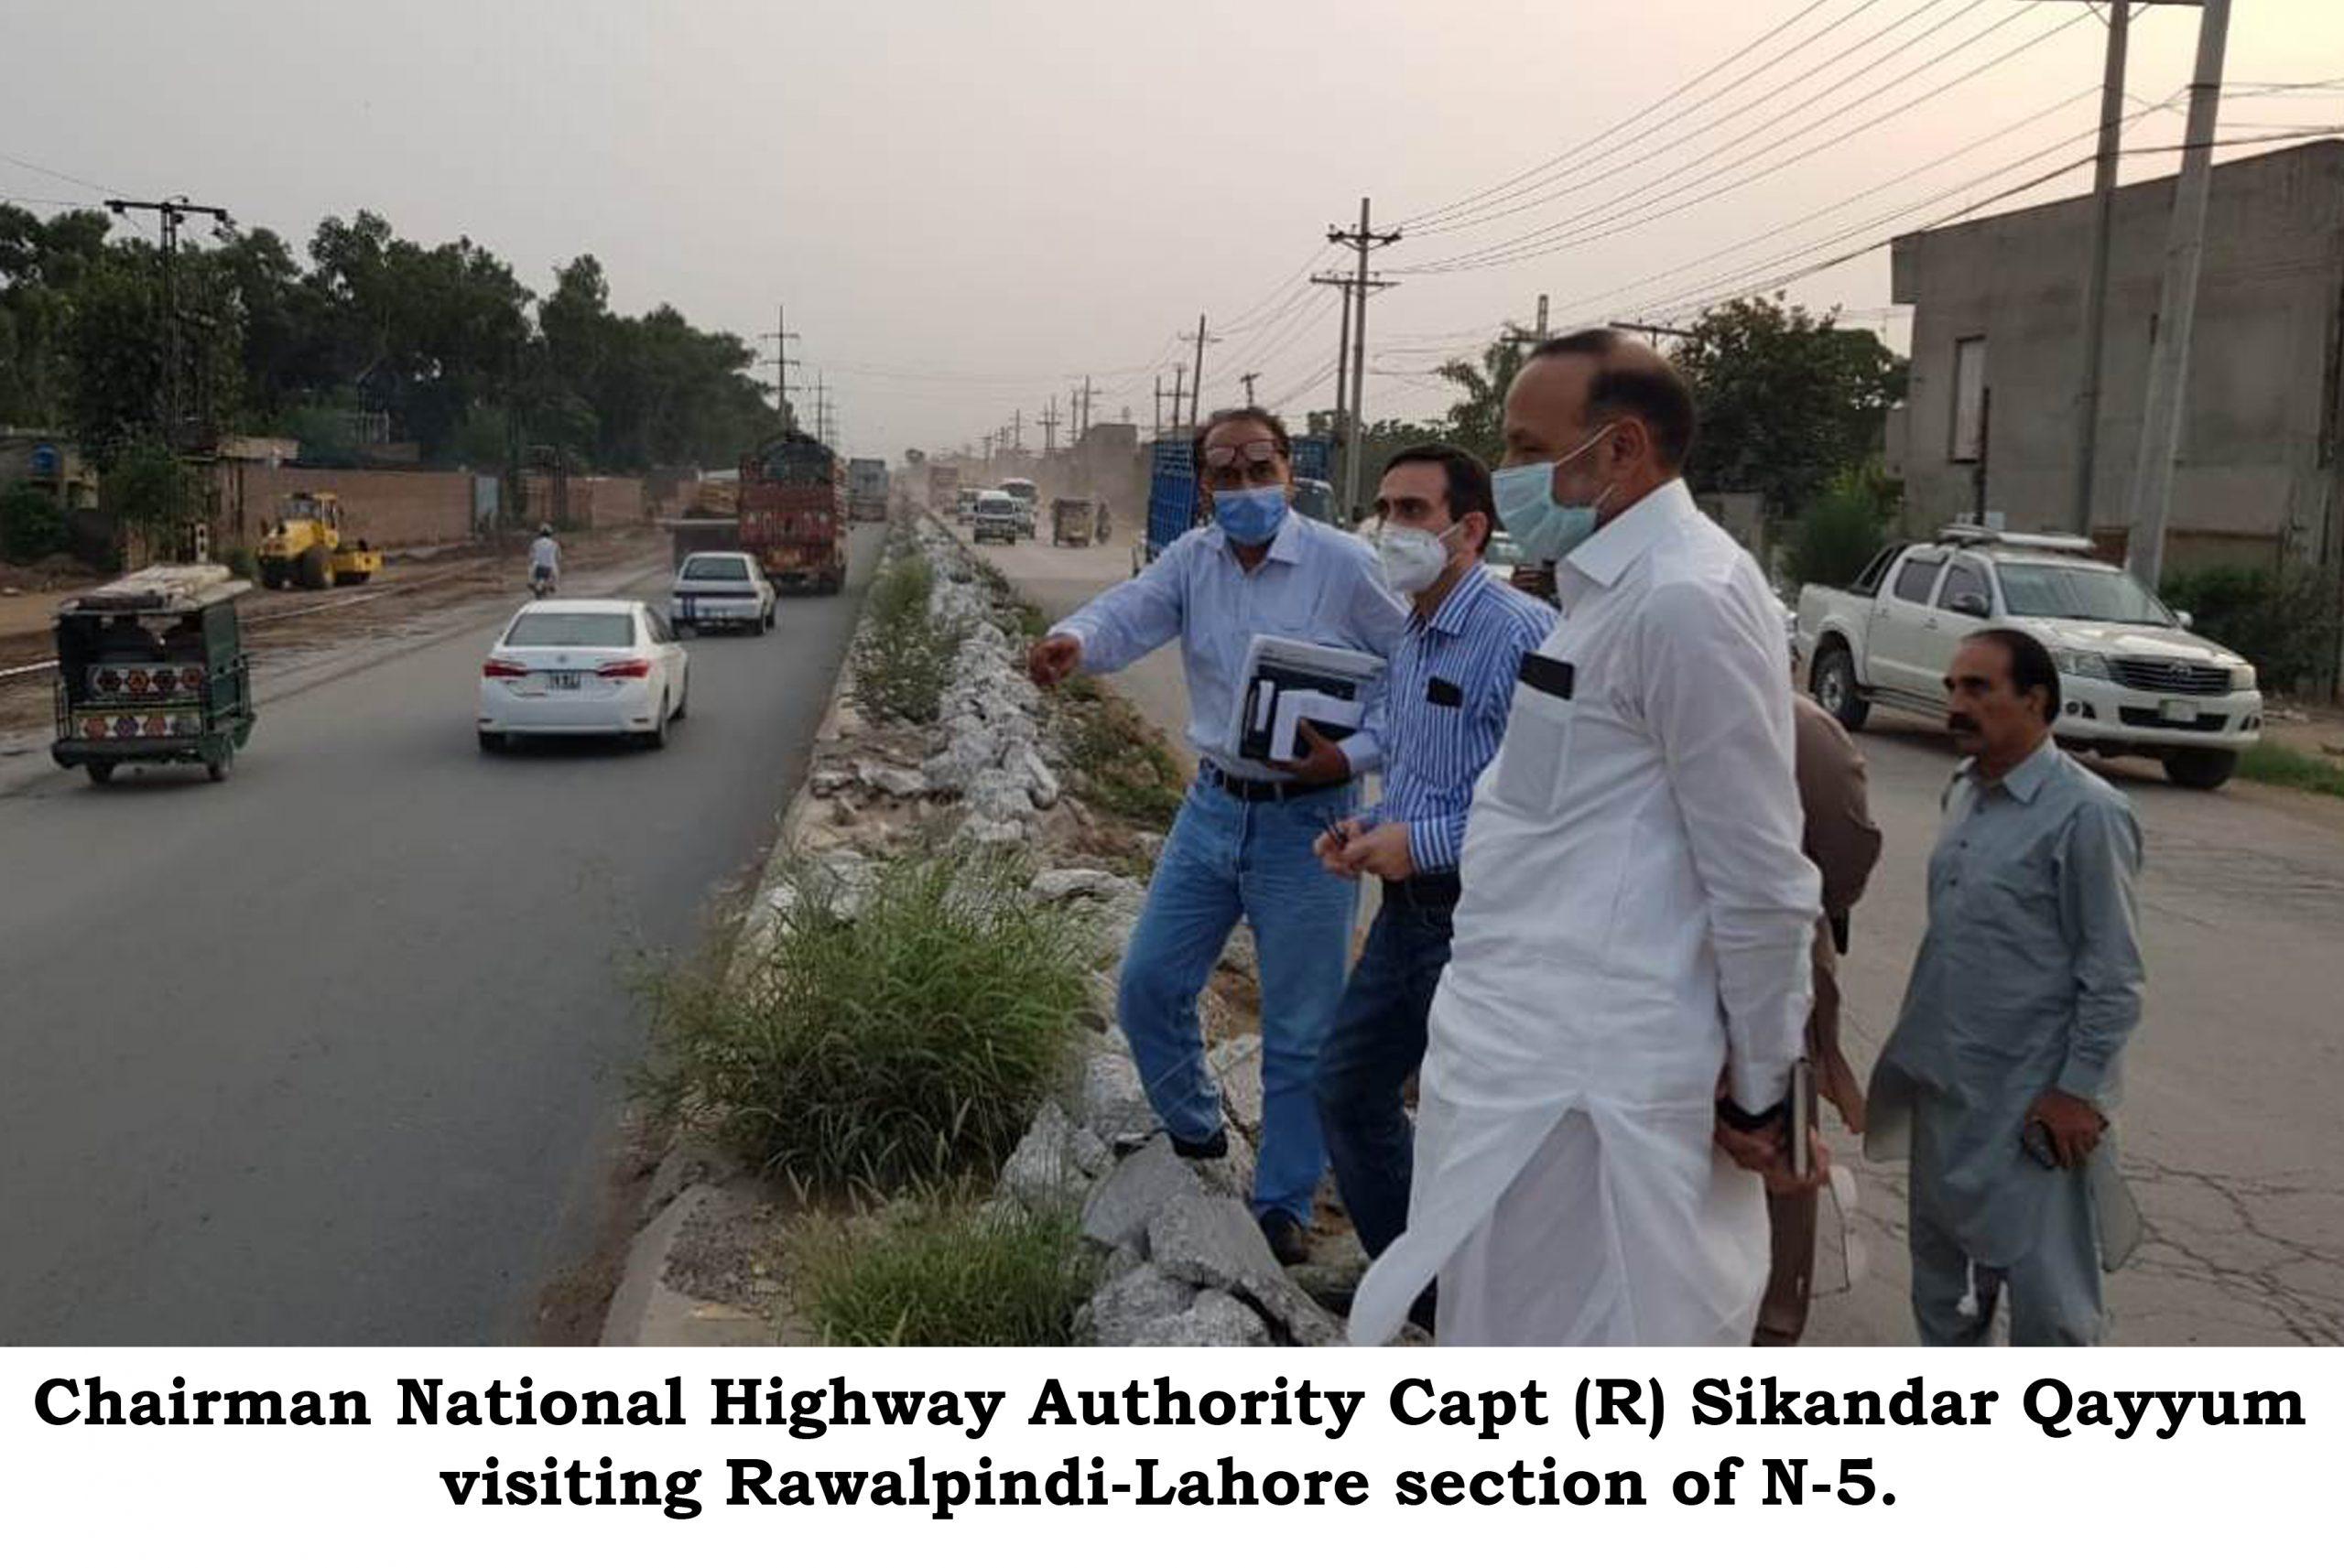 MINISTRY OF COMMUNICATIONS NATIONAL HIGHWAY AUTHORITY